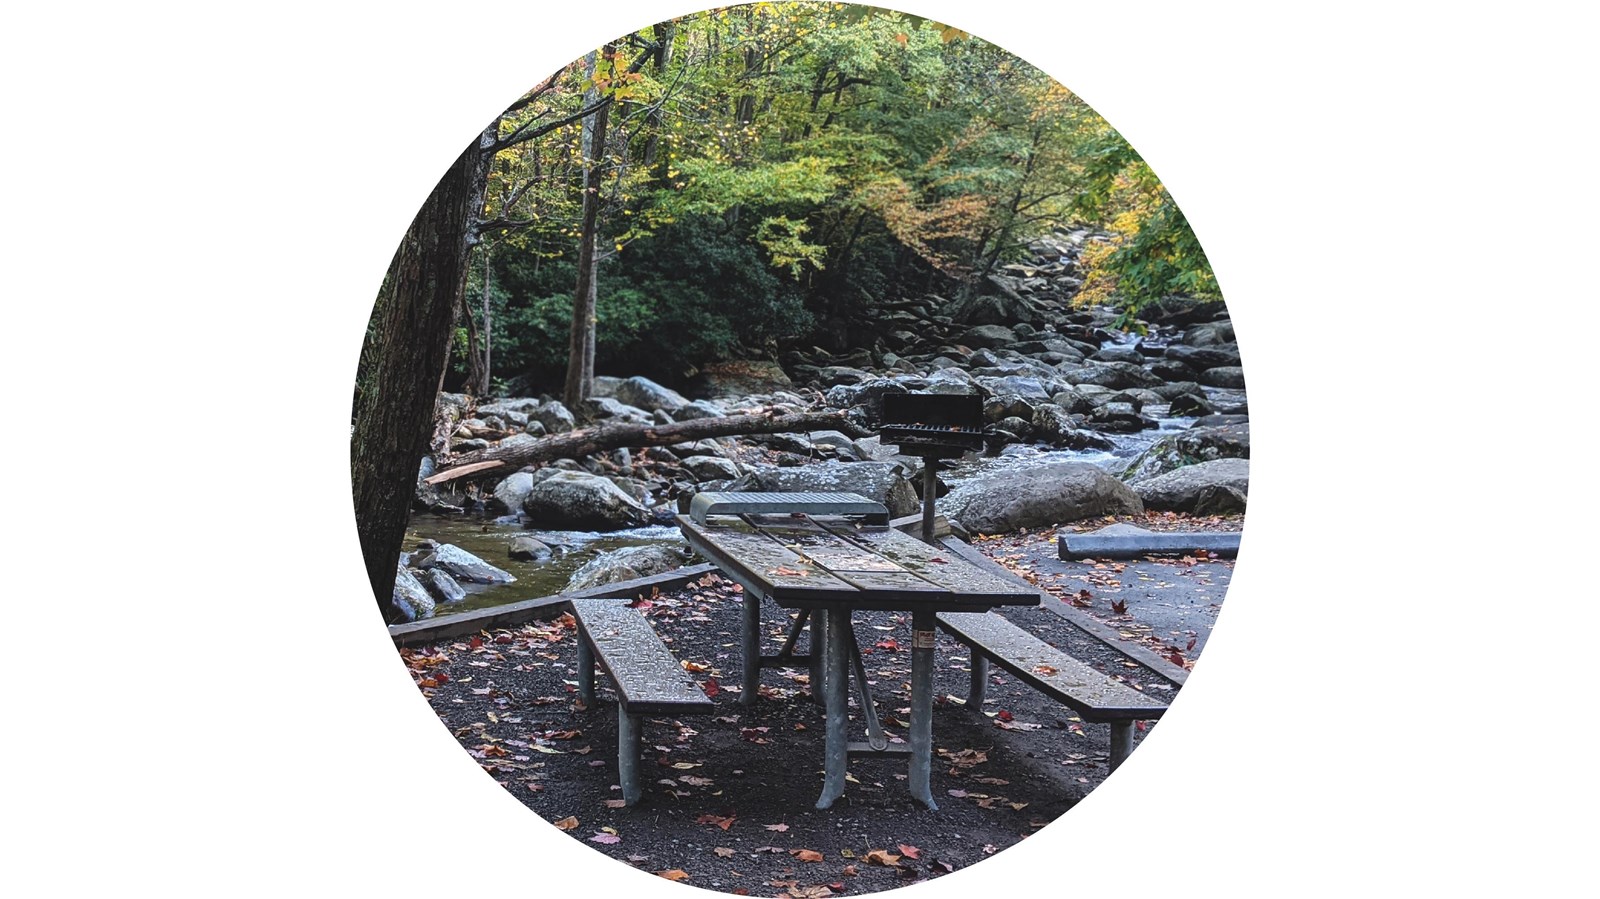 A wooden picnic table on gravel next to a parking space along a rocky river and near trees.